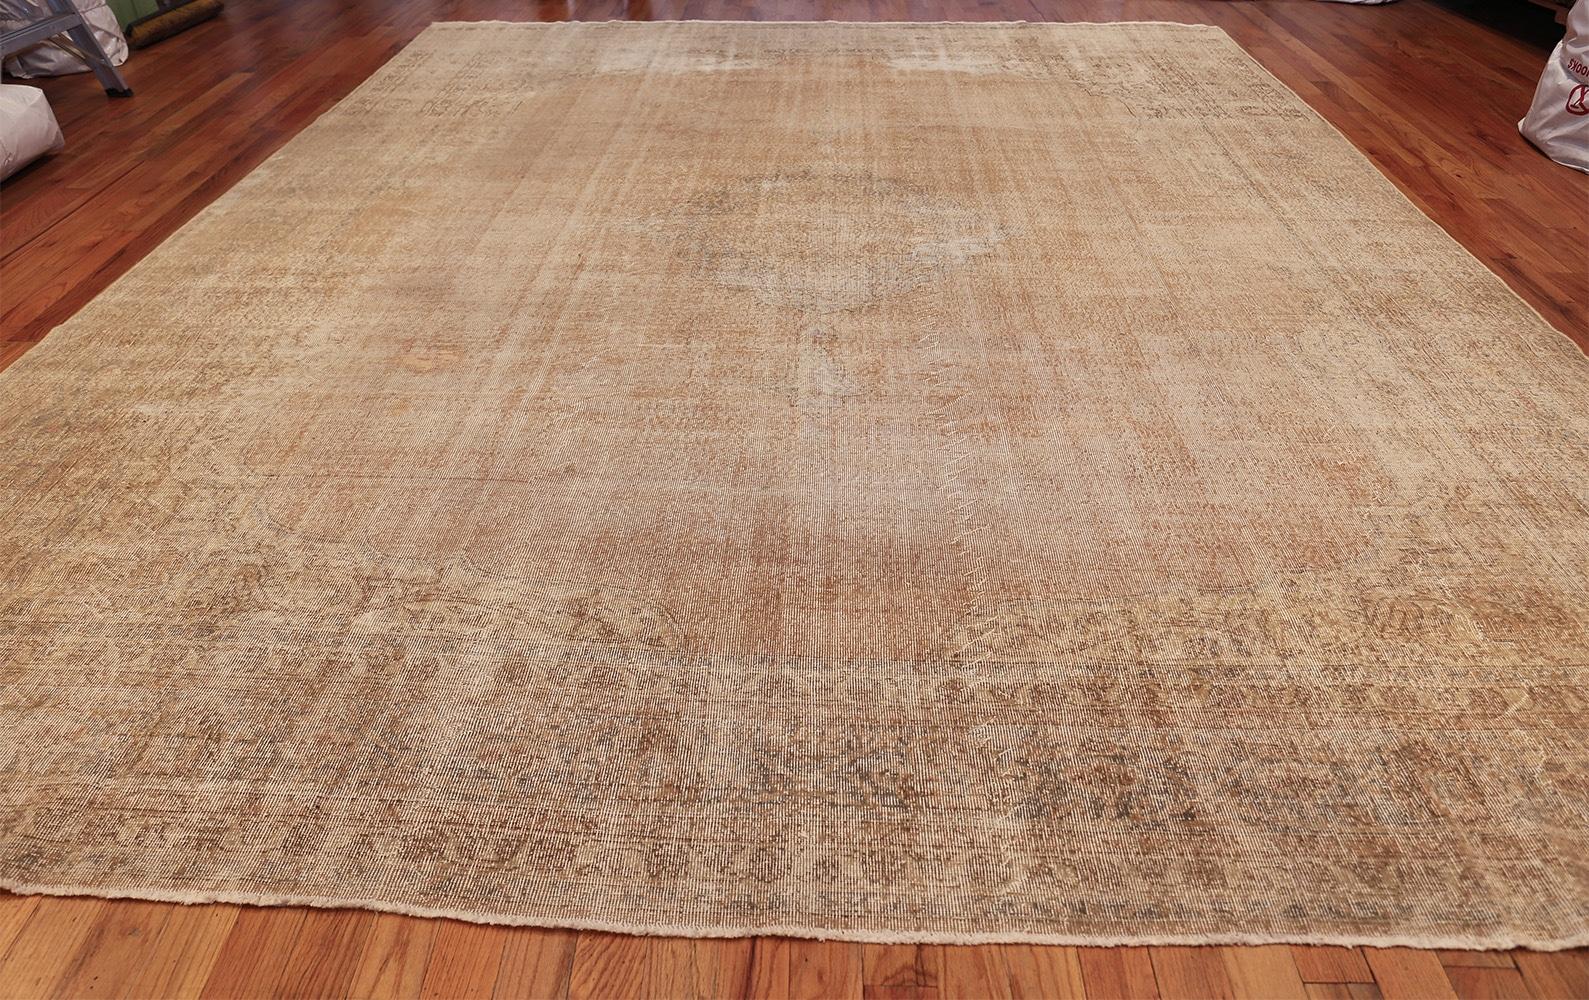 Hand-Knotted Vintage Worn Distressed Shabby Chic Turkish Sivas Rug. Size: 11 ft 3 in x 14 ft 